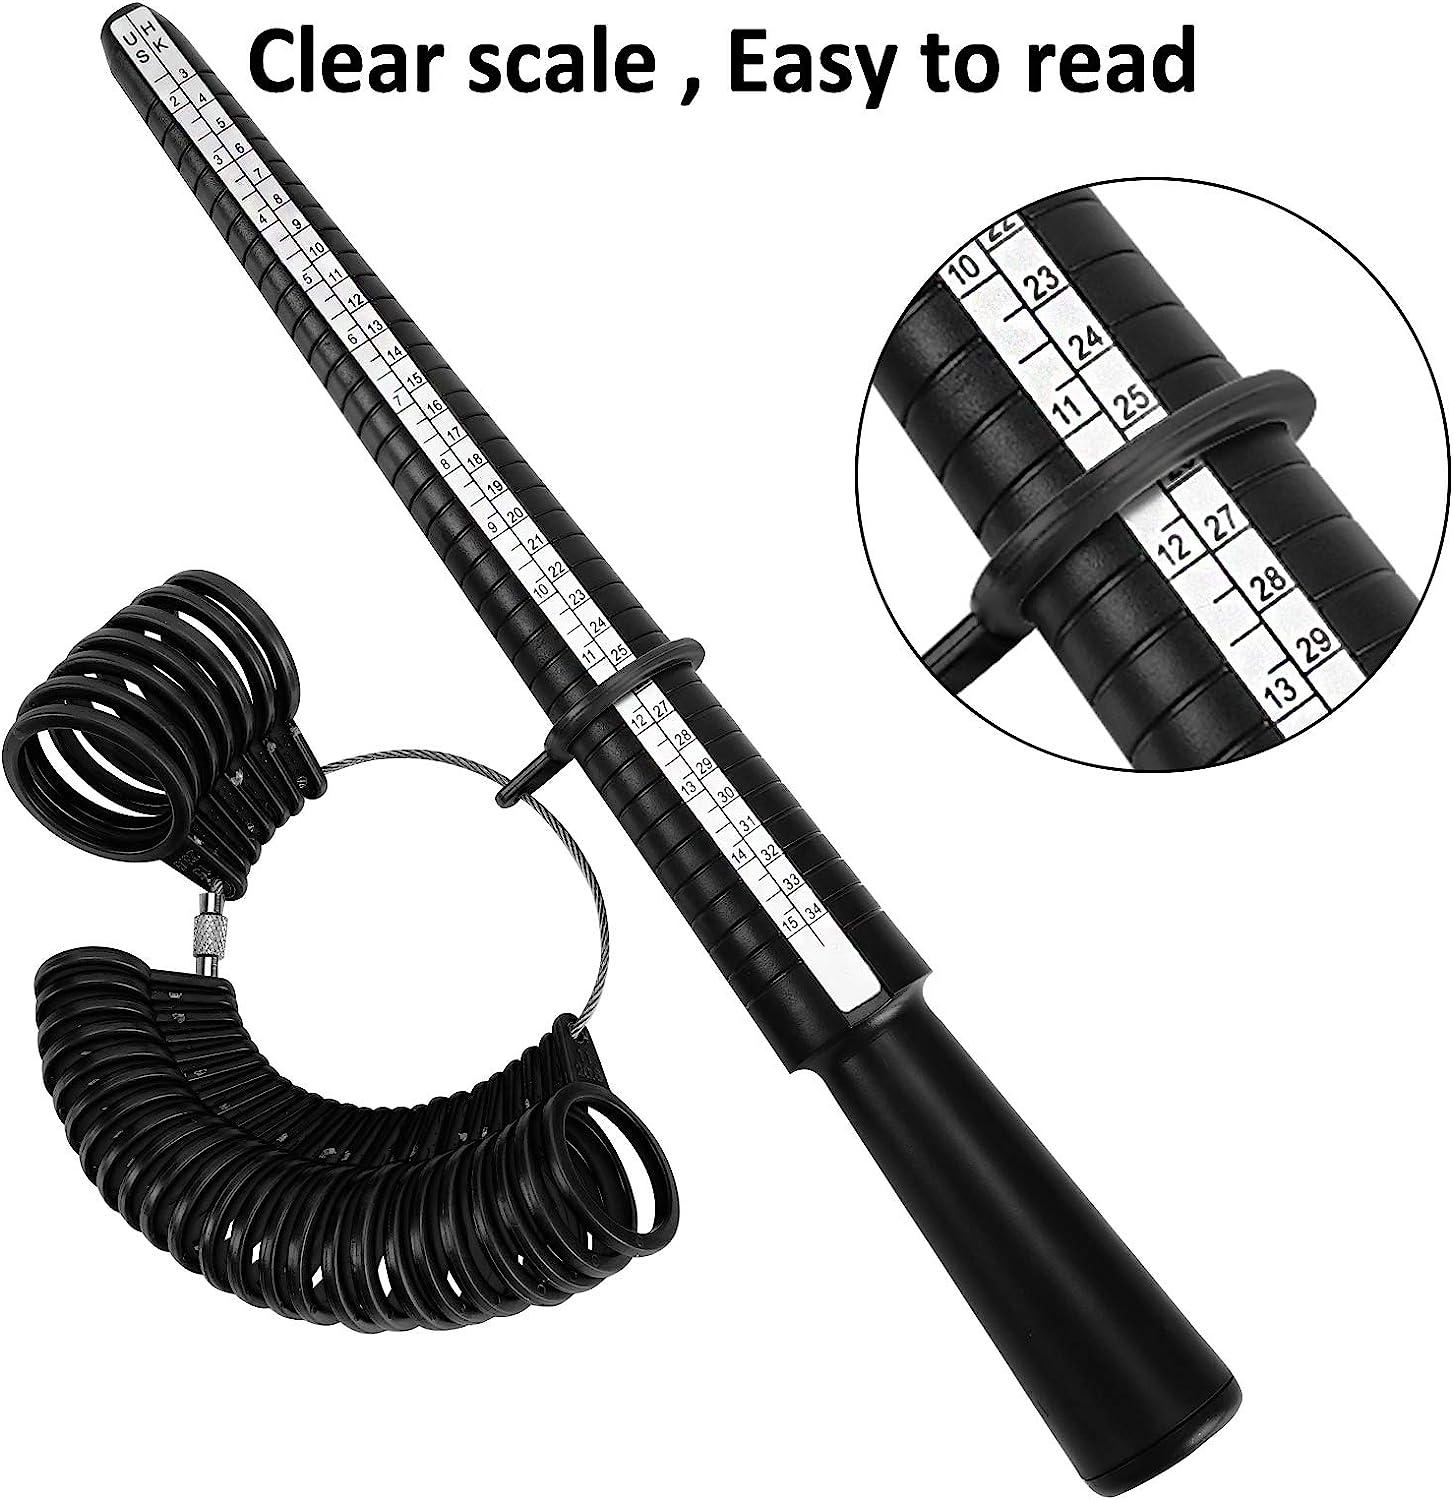 BENCH WIZARD 12.5 Grooved Plastic Ring Stick Mandrel | Black Design |  Sizes 1-15 with Quarter Increments | Ideal for Ring Sizing & Repairs